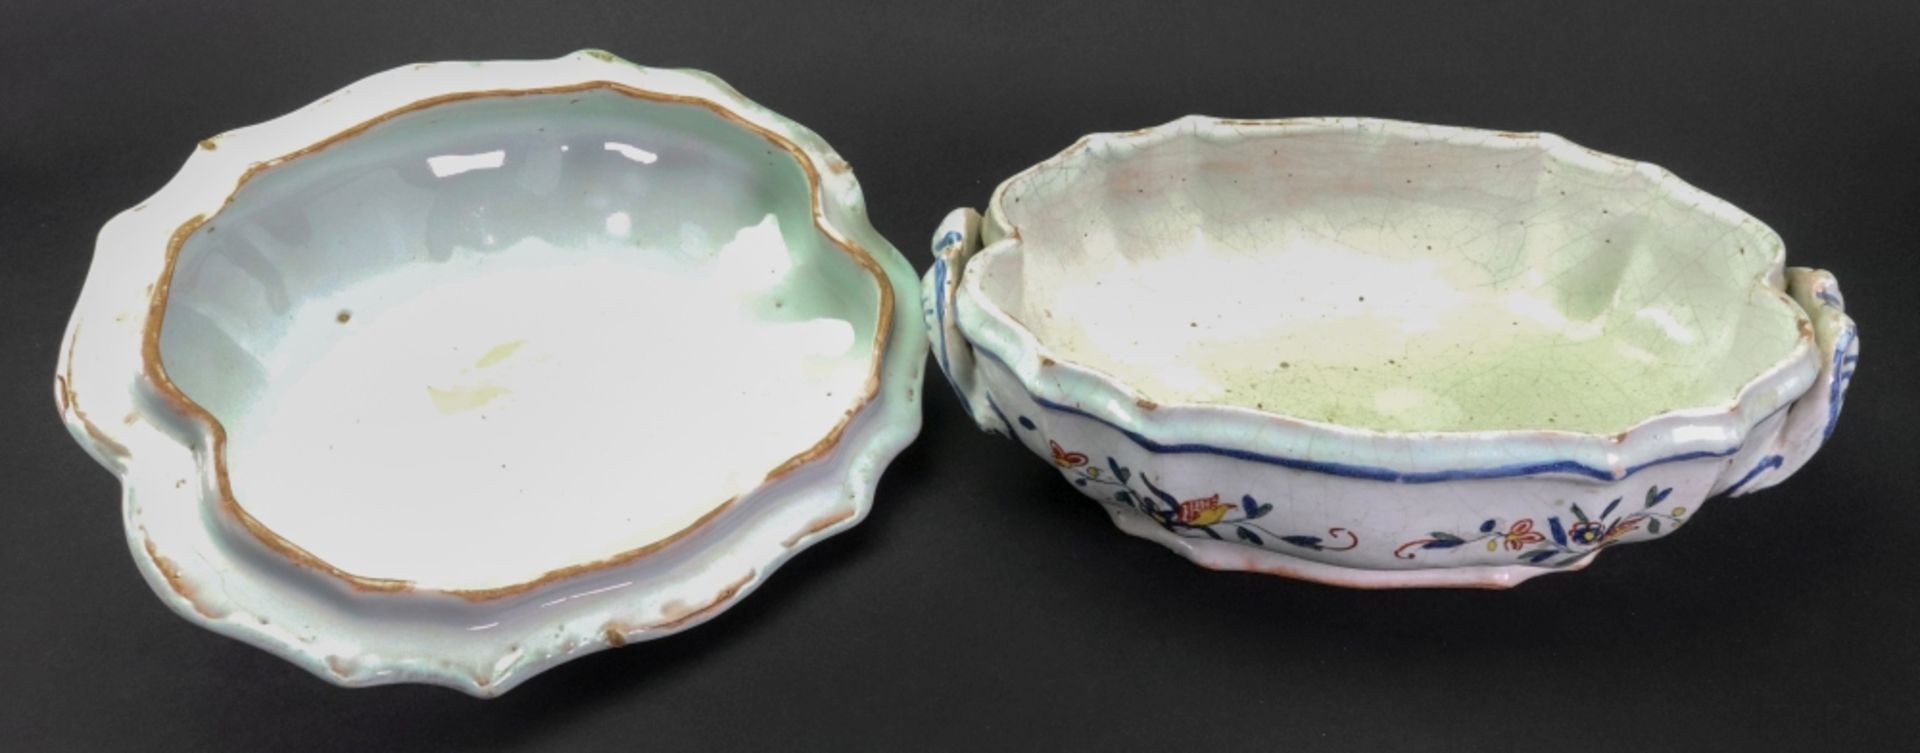 A French Faience polychrome two-handled tureen and cover, 18th century, - Bild 2 aus 2